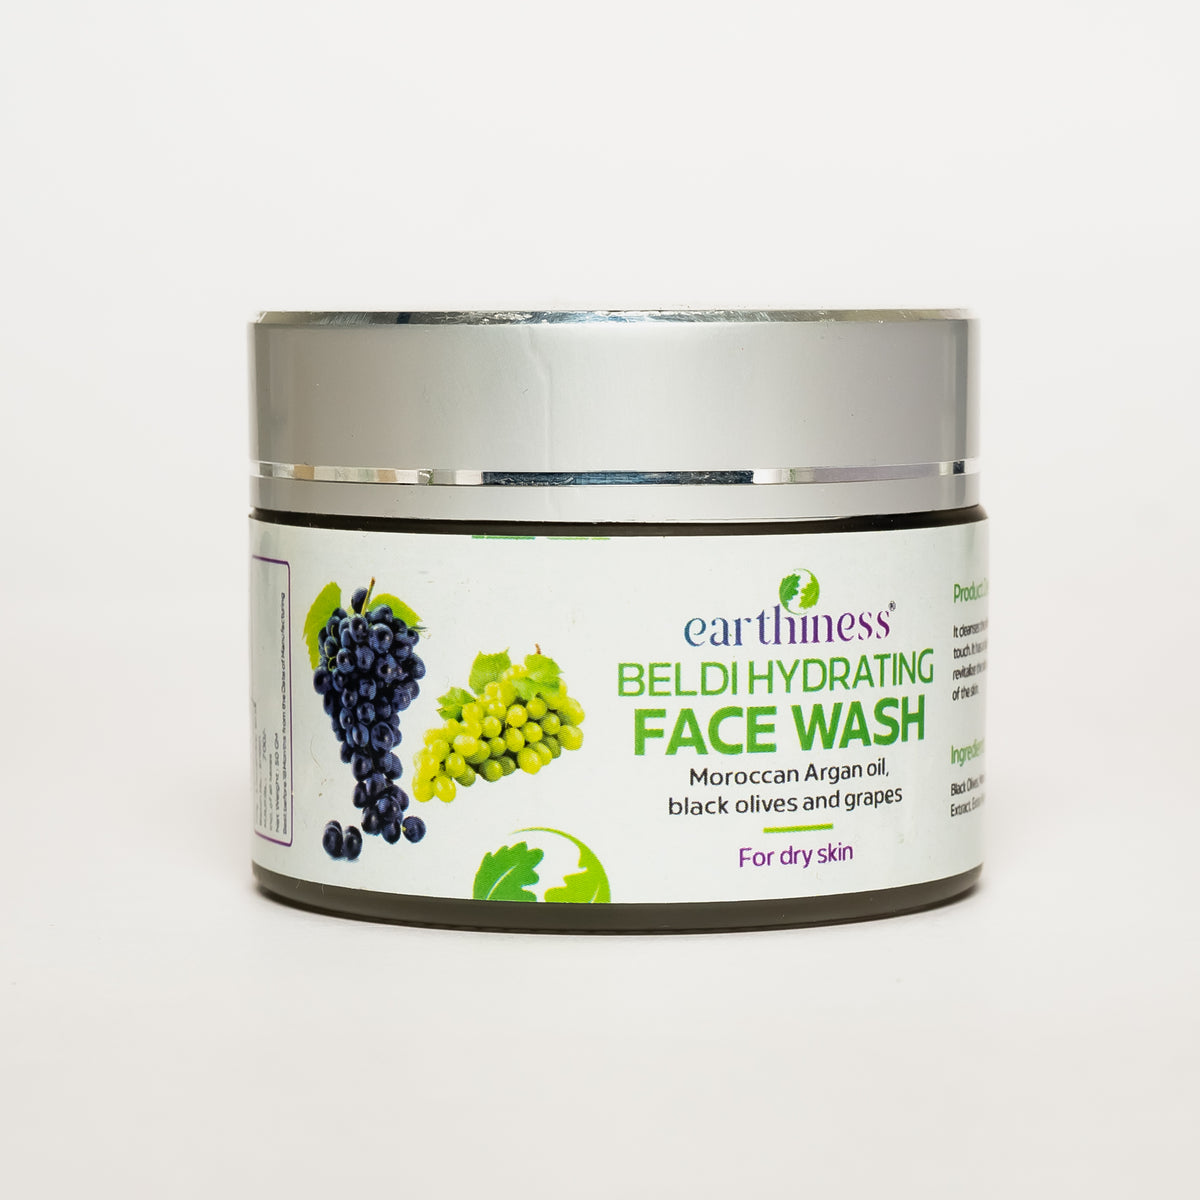 Beldi Hydrating Face Wash with Extra Virgin Olive Oil & Black Olives For Soft, Hydrating Skin